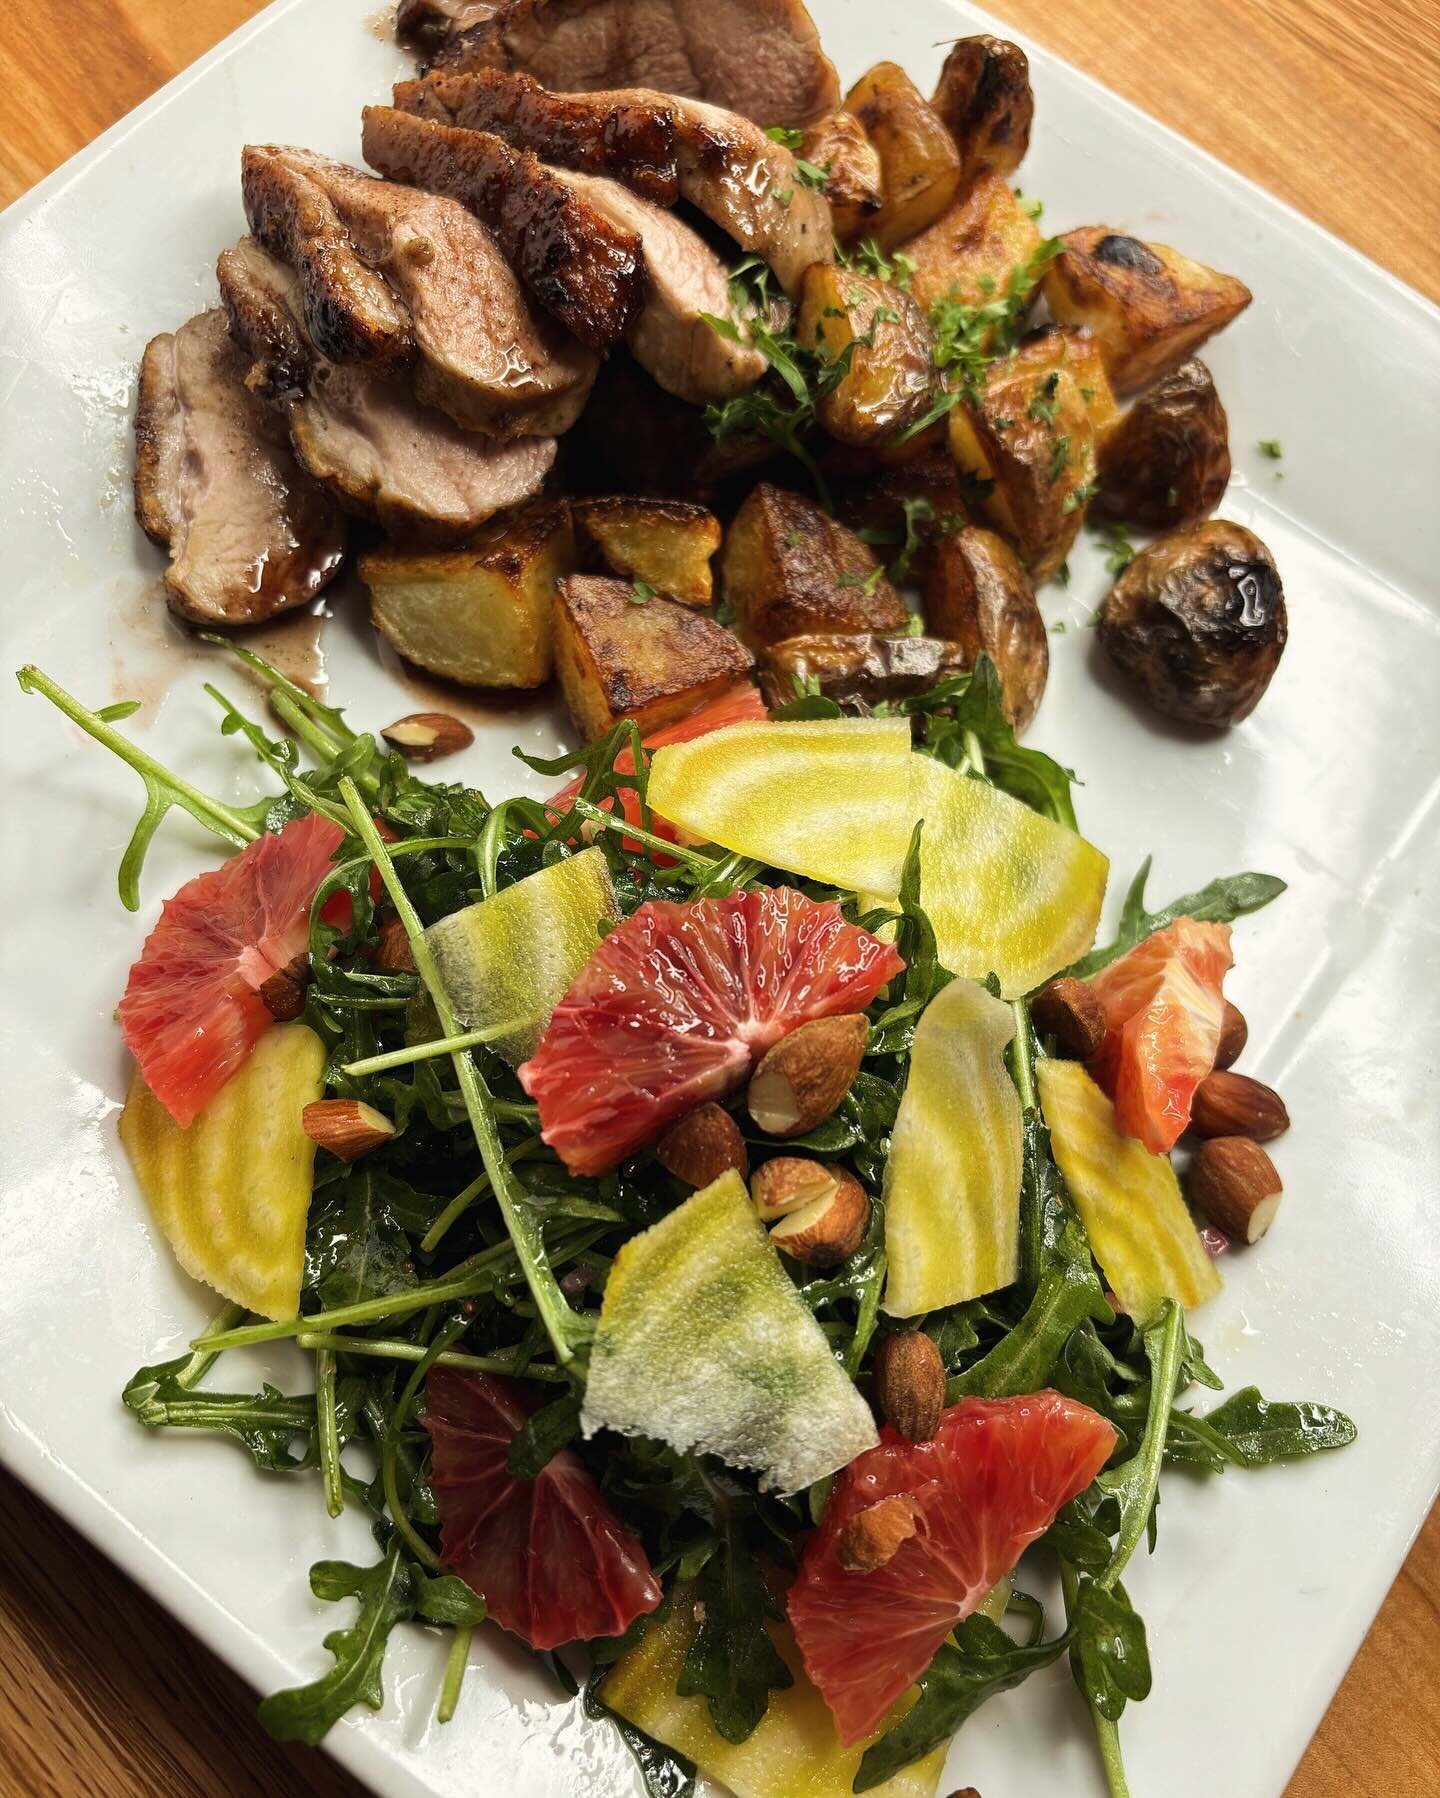 Tonight&rsquo;s Feature-

Spiced Glazed Duck served with Duck Fat Potatoes and a salad of Arugula, Shaved Beets, Blood Orange, Smoked Almonds and finished with a Pear Vinaigrette